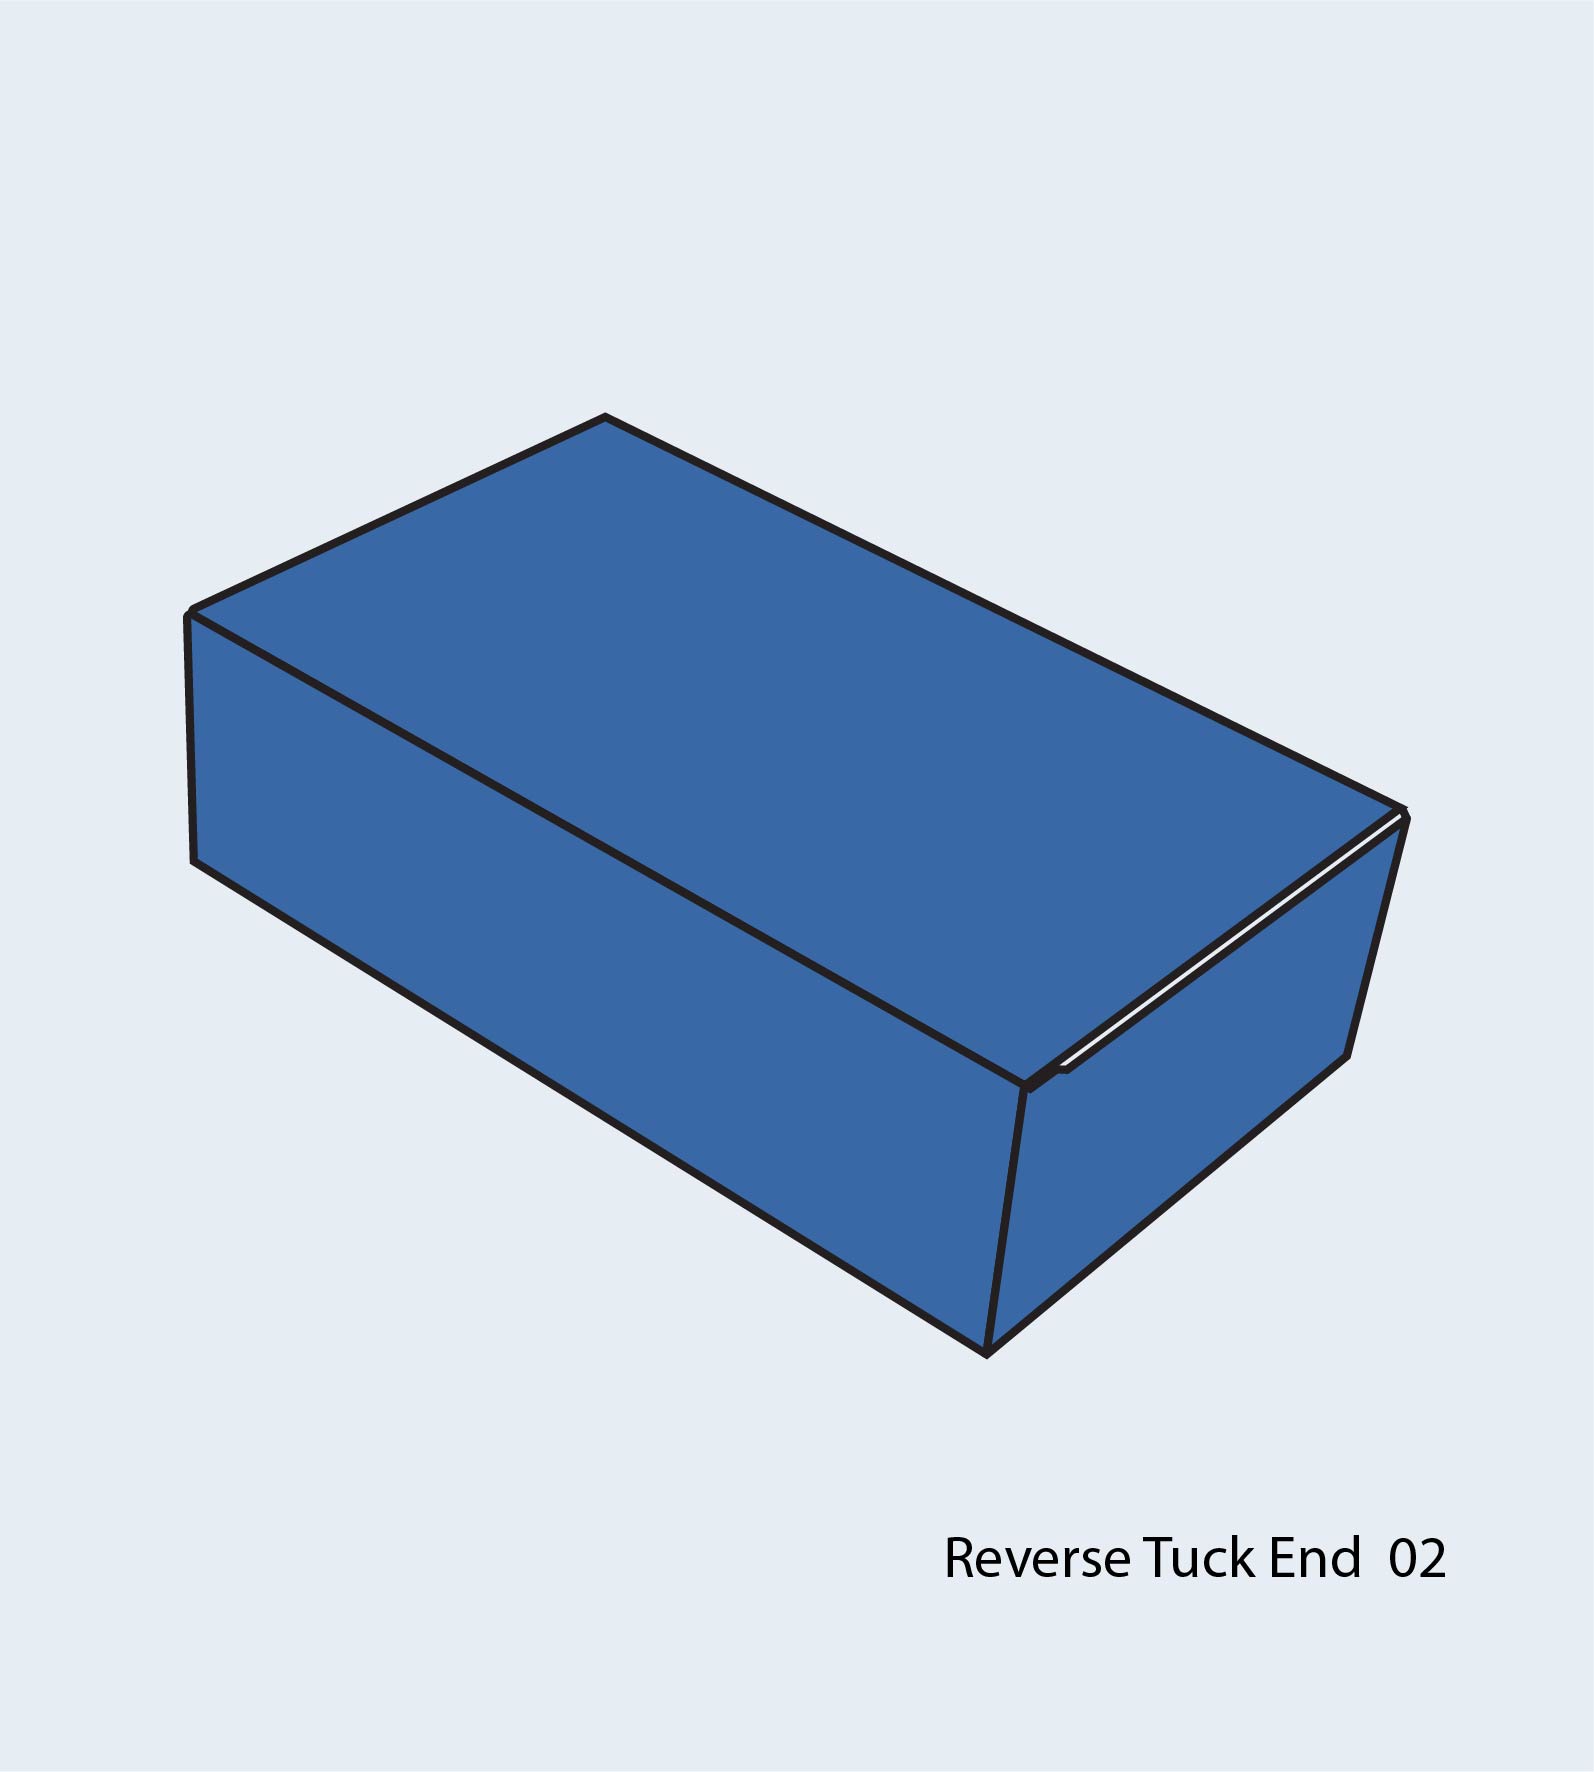 Reverse Tuck Boxes